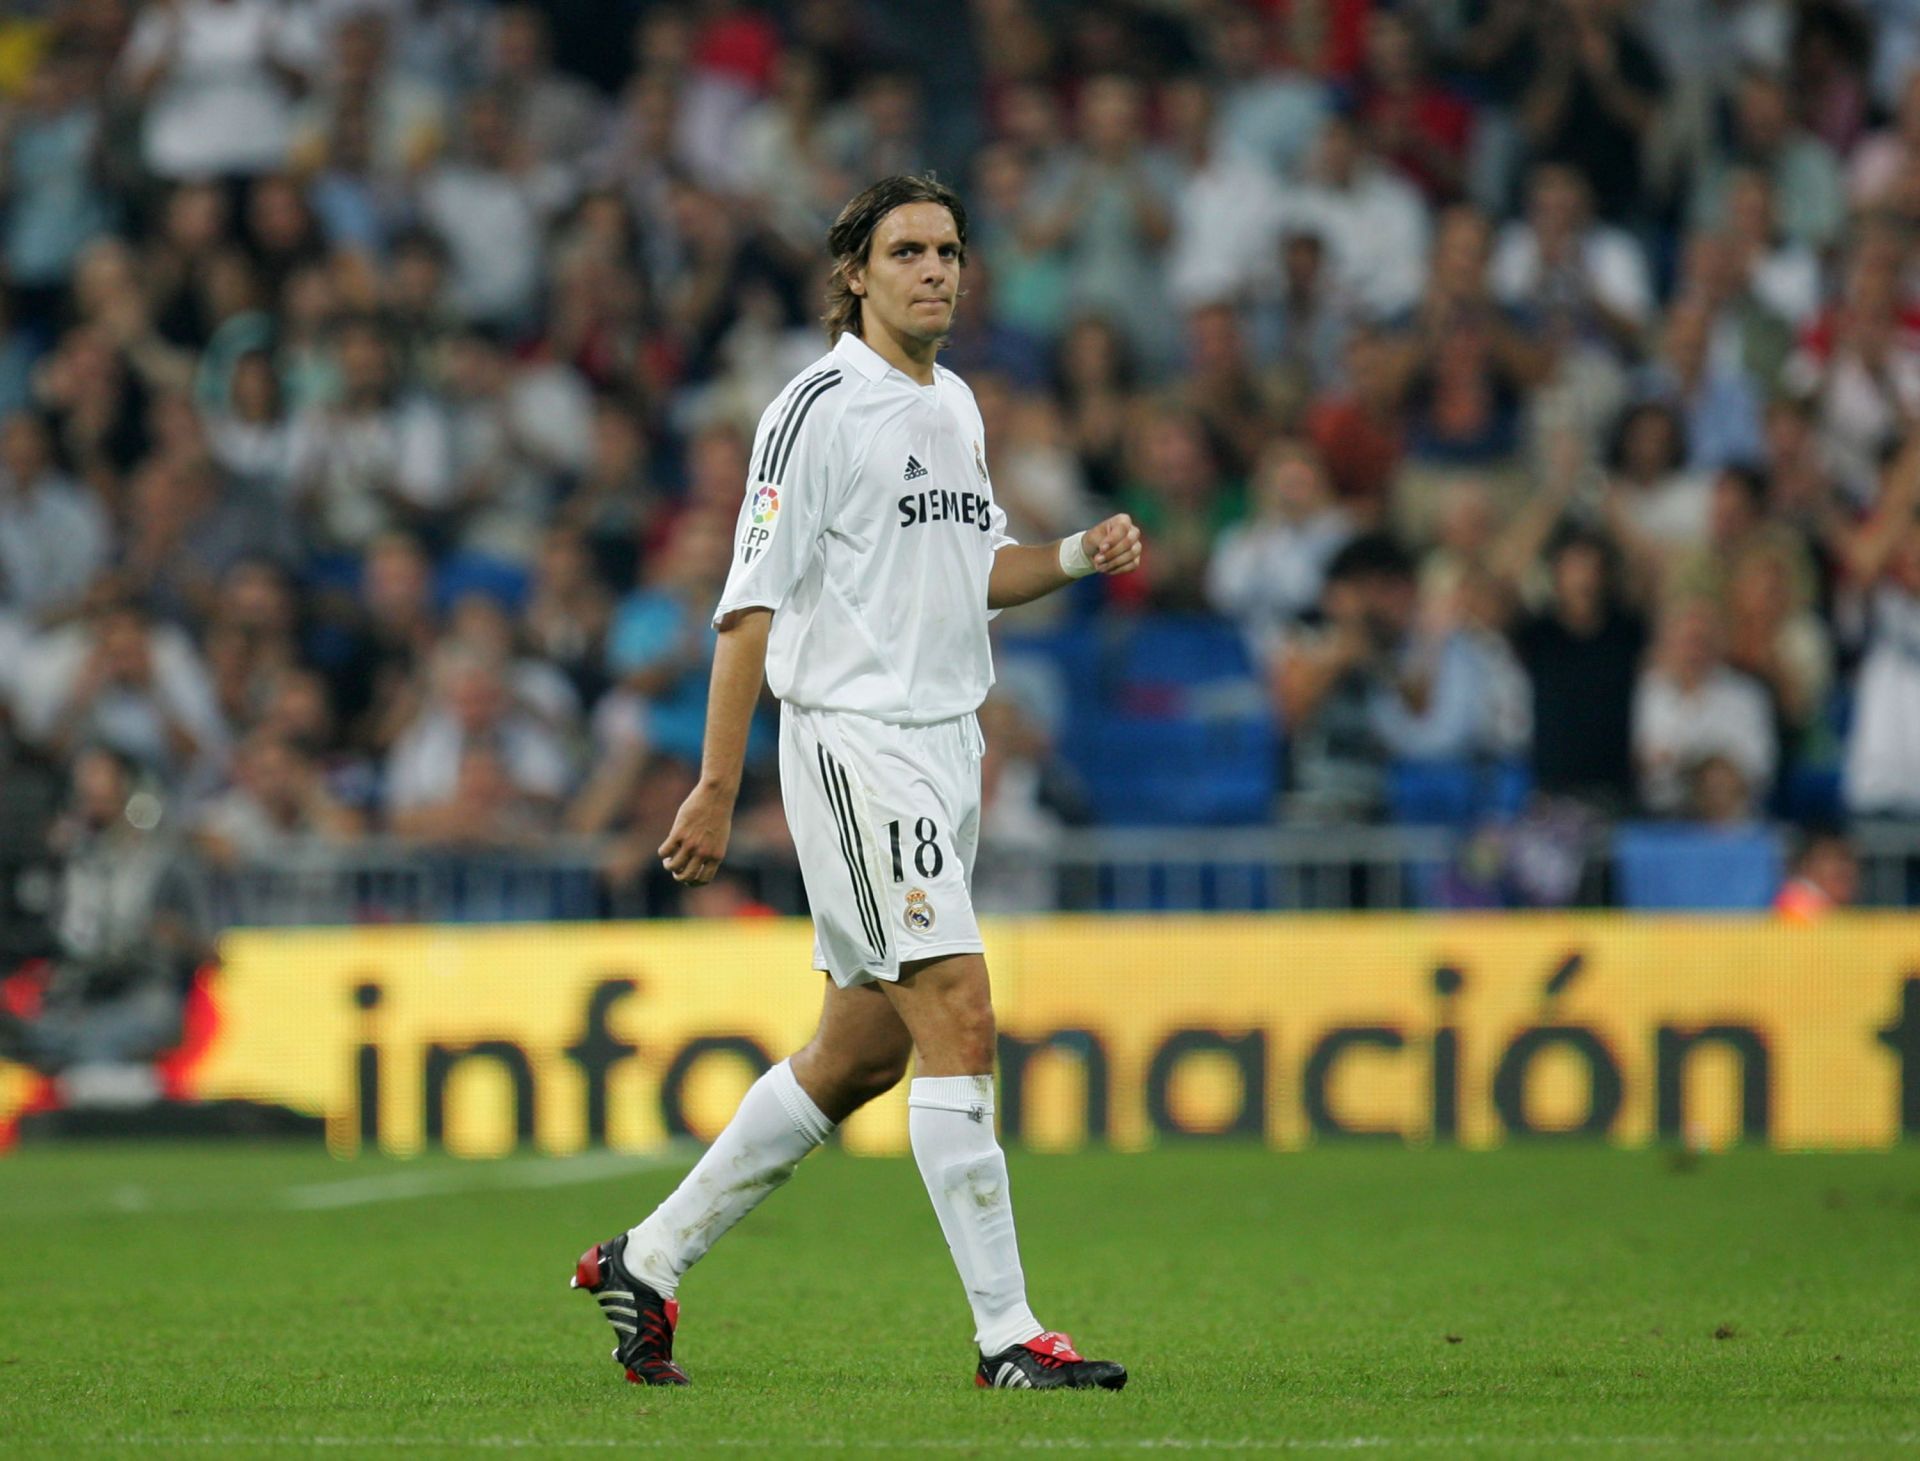 Johnathan Woodgate for Real Madrid against Athletic Bilbao